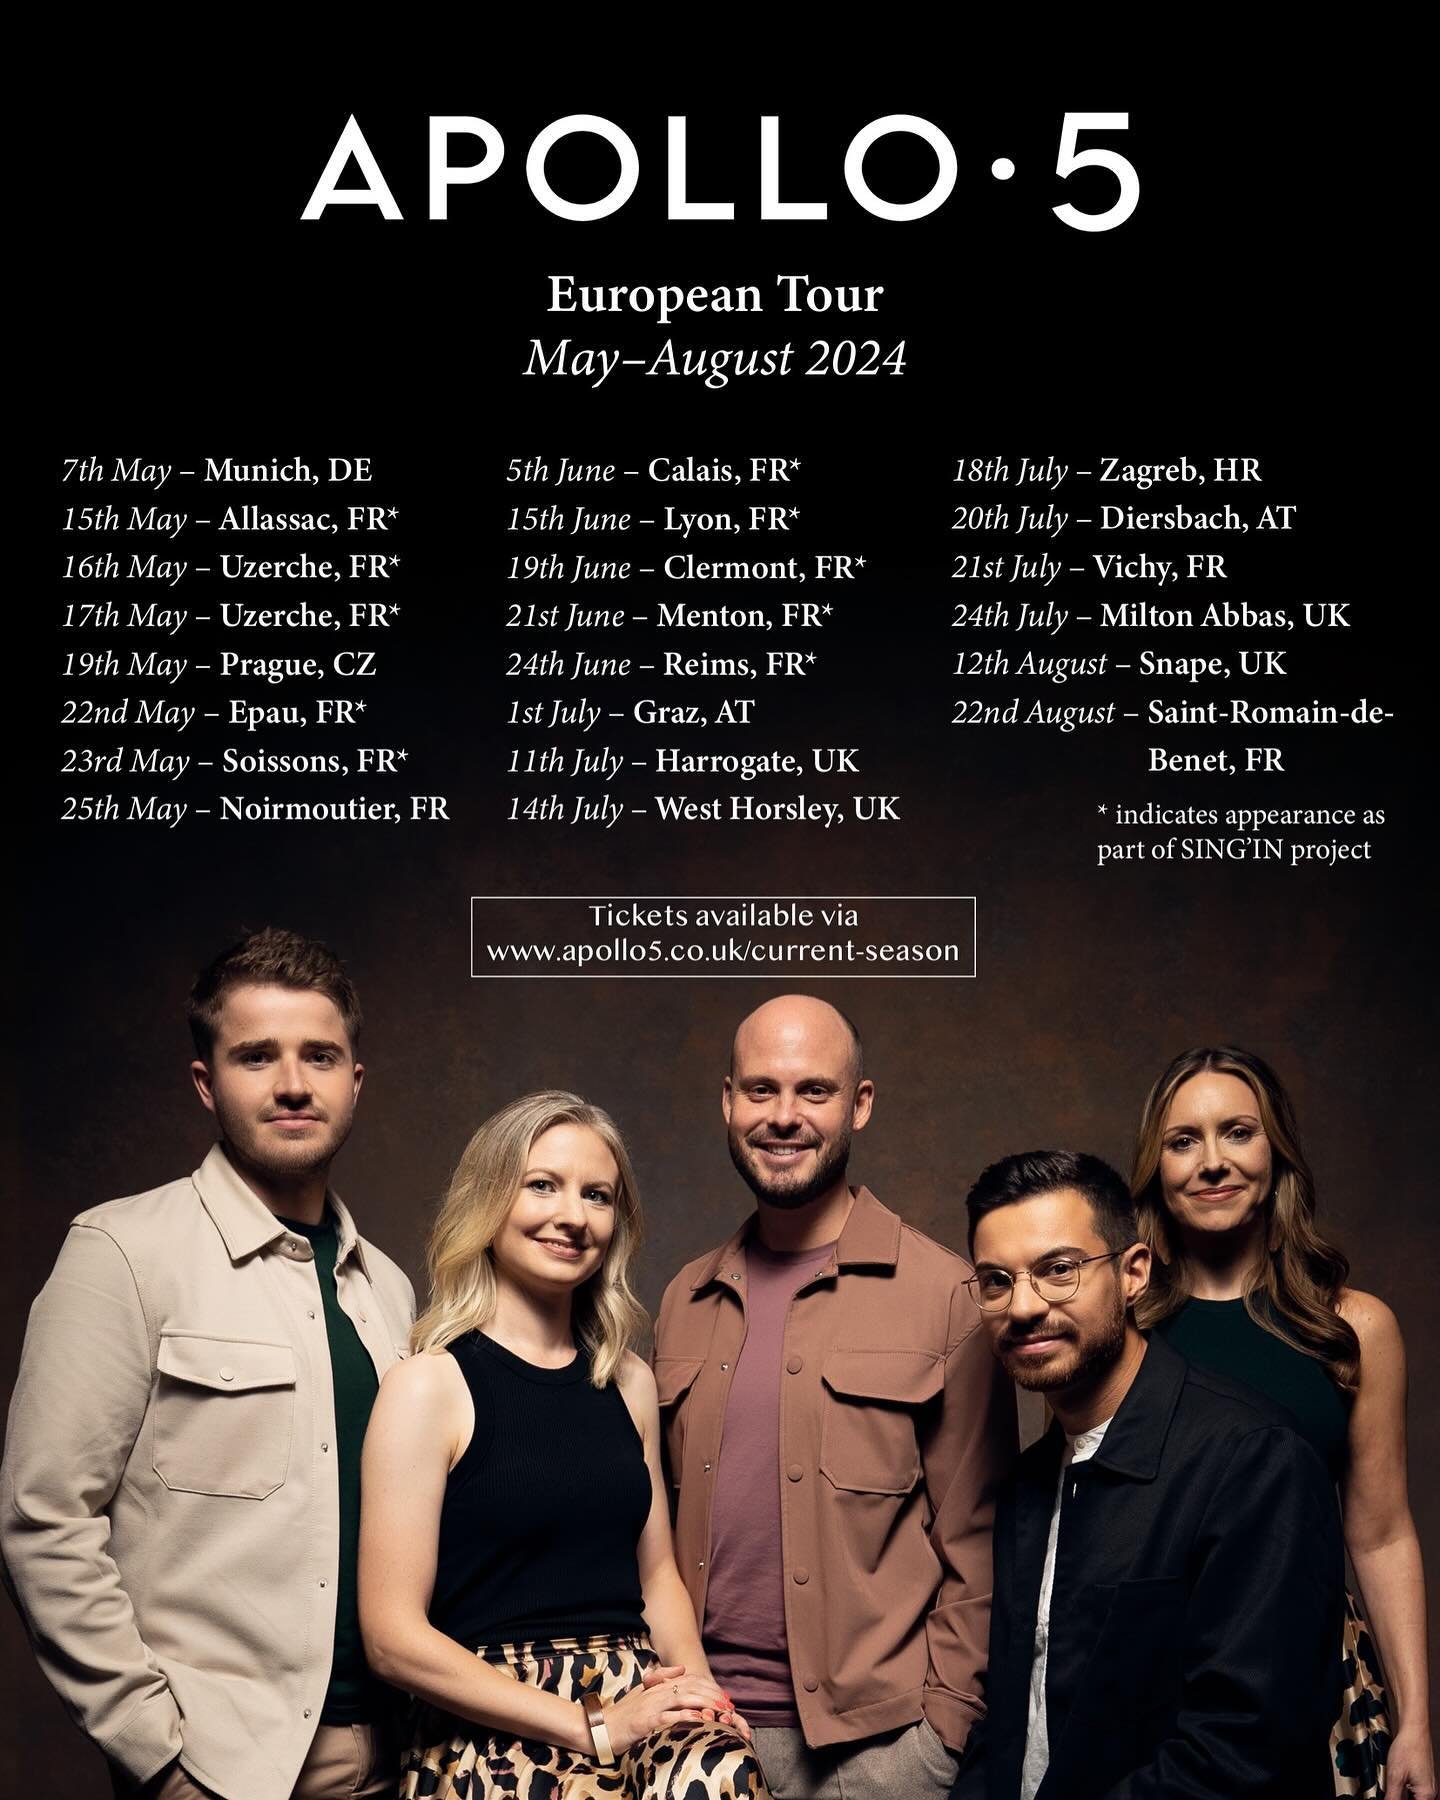 We&rsquo;ve got a busy few months of touring ahead of us, with concerts in the UK, France, Germany, Austria, Croatia, and the Czech Republic. We start proceedings in the beautiful surroundings of Bavaria this evening. Where will we be seeing you on o